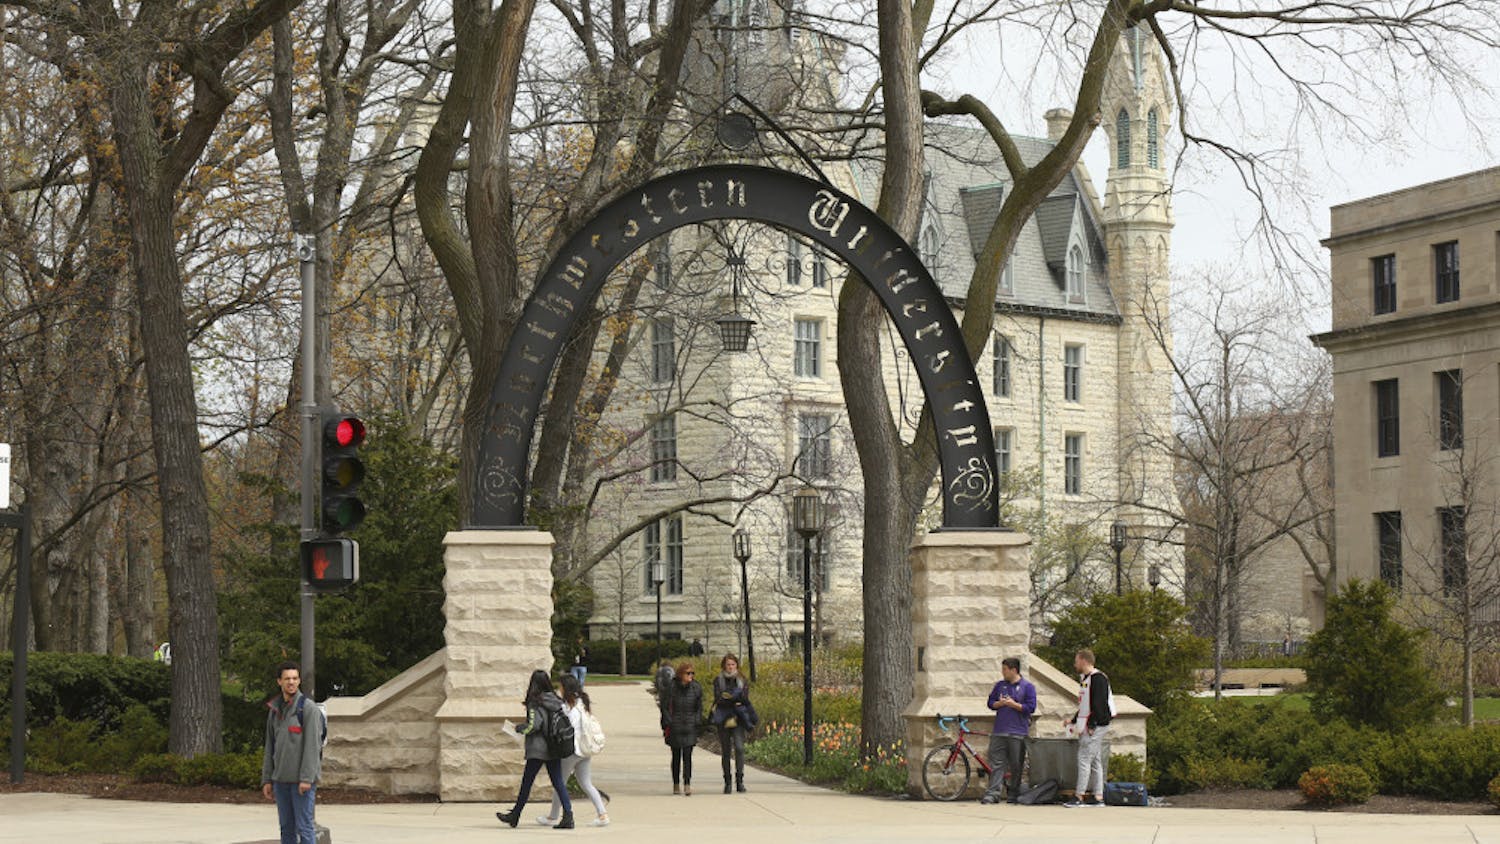 In this Friday, April 29, 2016, photo, people stand near the entrance gate to Northwestern University in Evanston, Ill. Northwestern University's student newspaper is under fire. Their first critics came from within the campus as student activists questioned journalists’ coverage of protests. Within days, editors decided to write a statement apologizing but their editorial prompted a second round of criticism from journalists around the country starting Monday, Nov. 11, 2019. (Chris Walker/Chicago Tribune via AP)